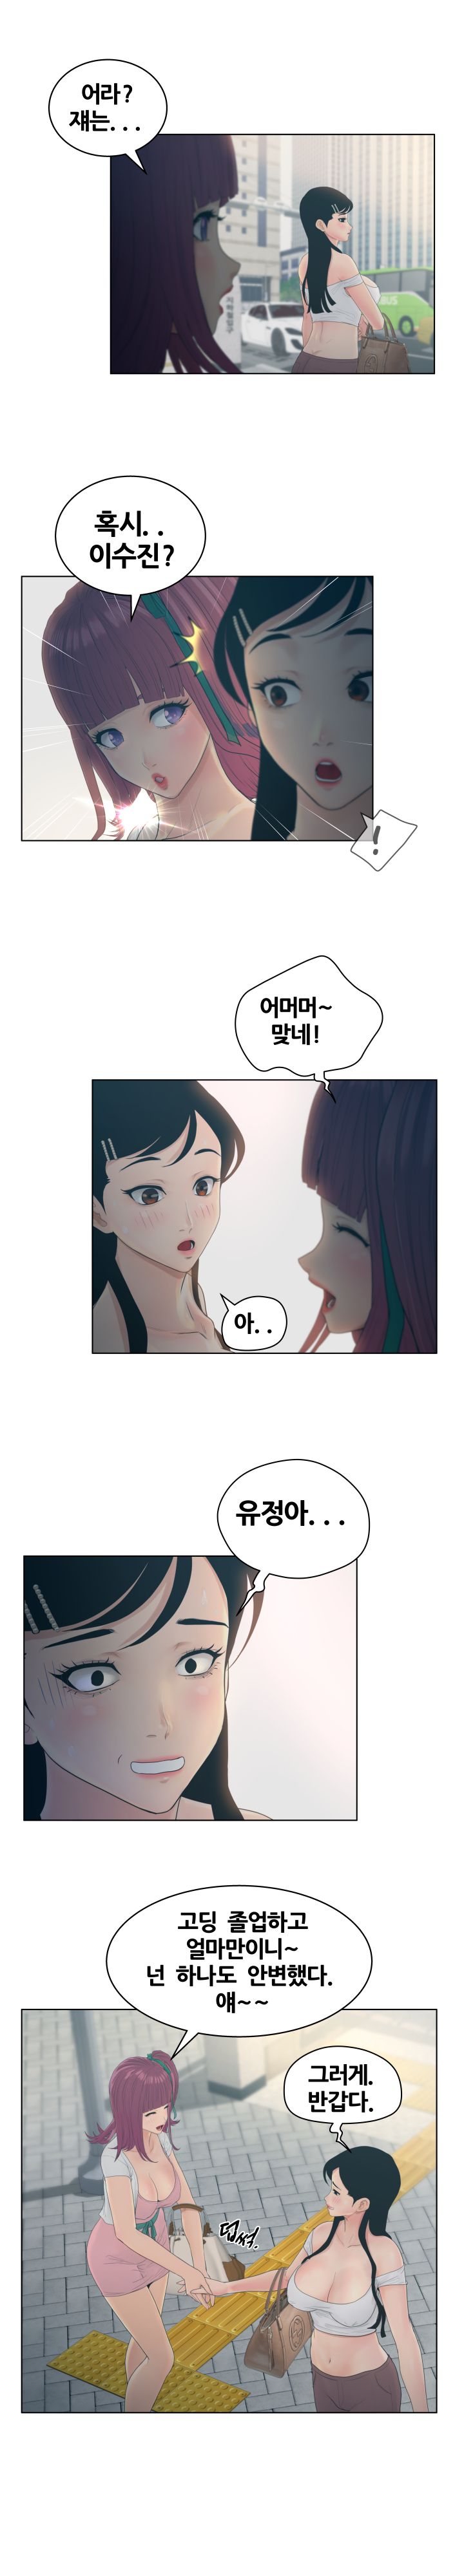 Share Girls Raw - Chapter 9 Page 5